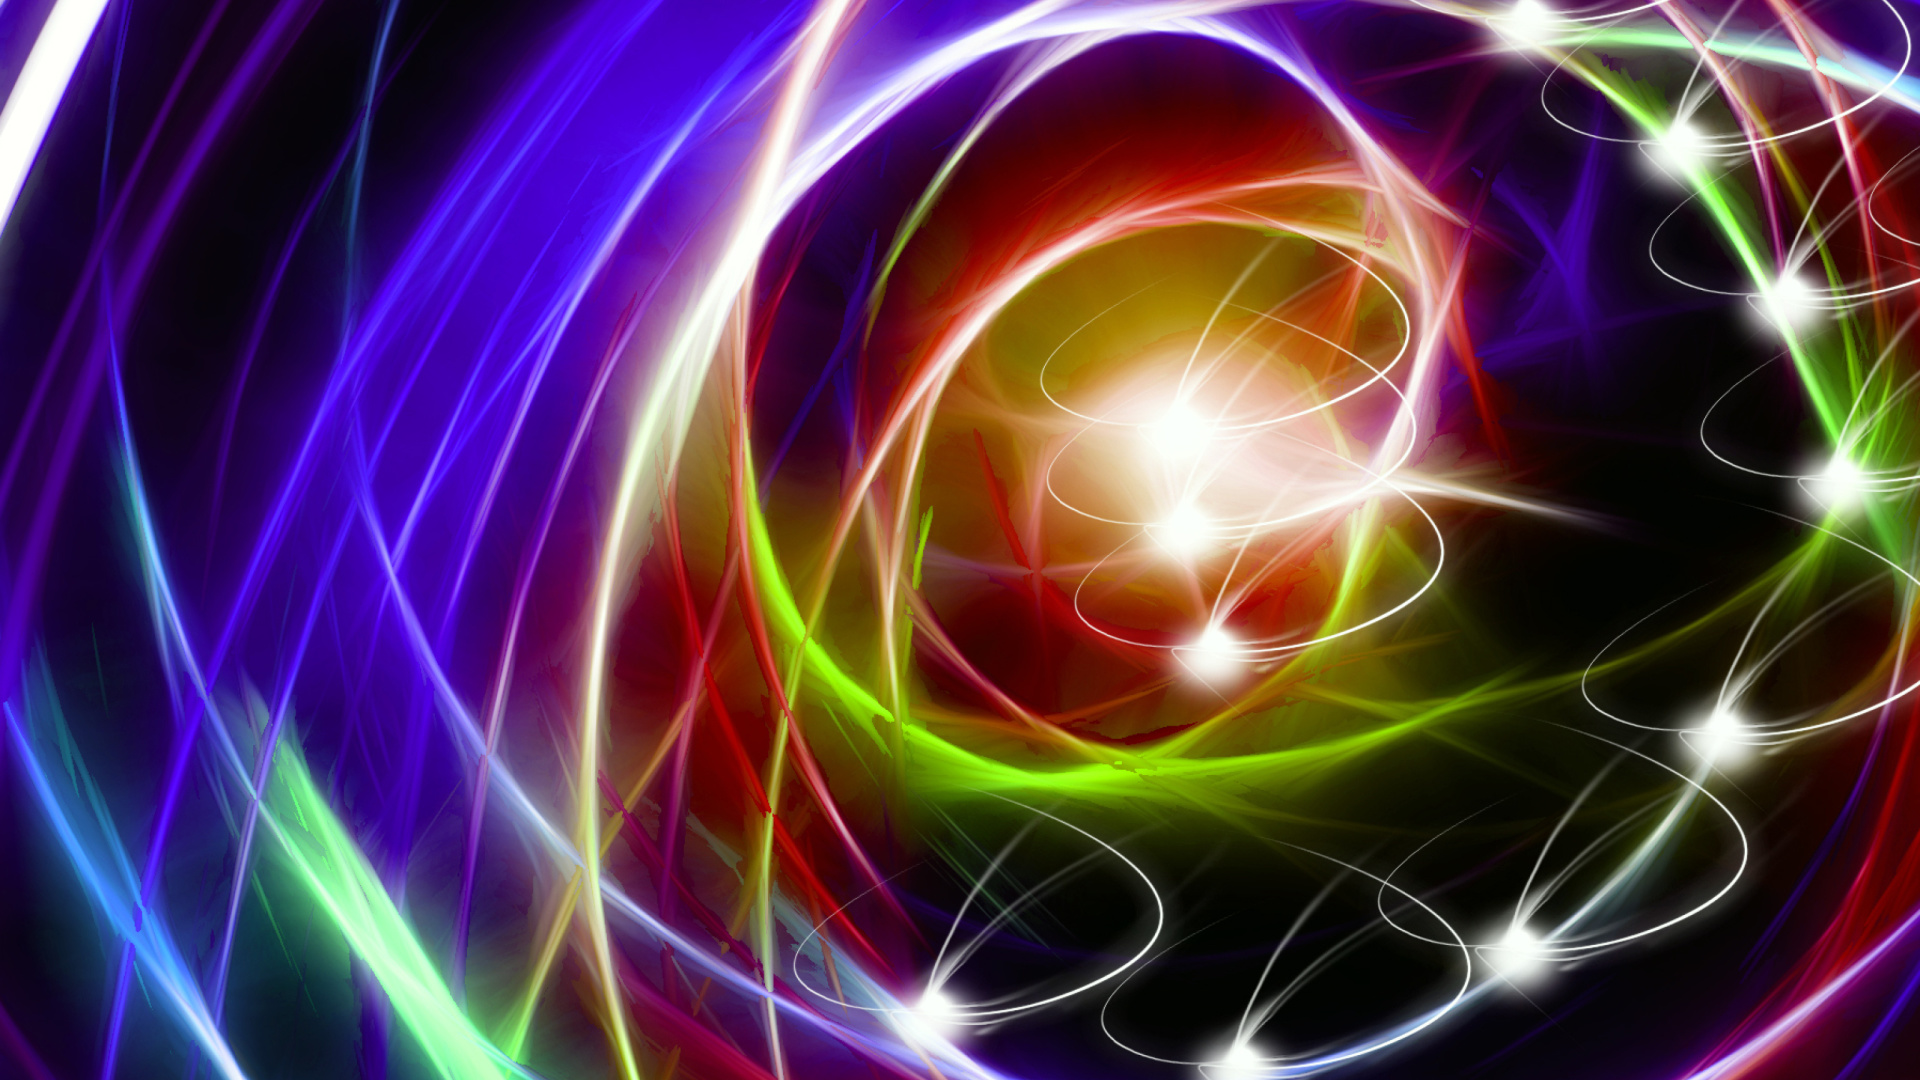 Abstraction chaos Rays wallpaper 1920x1080